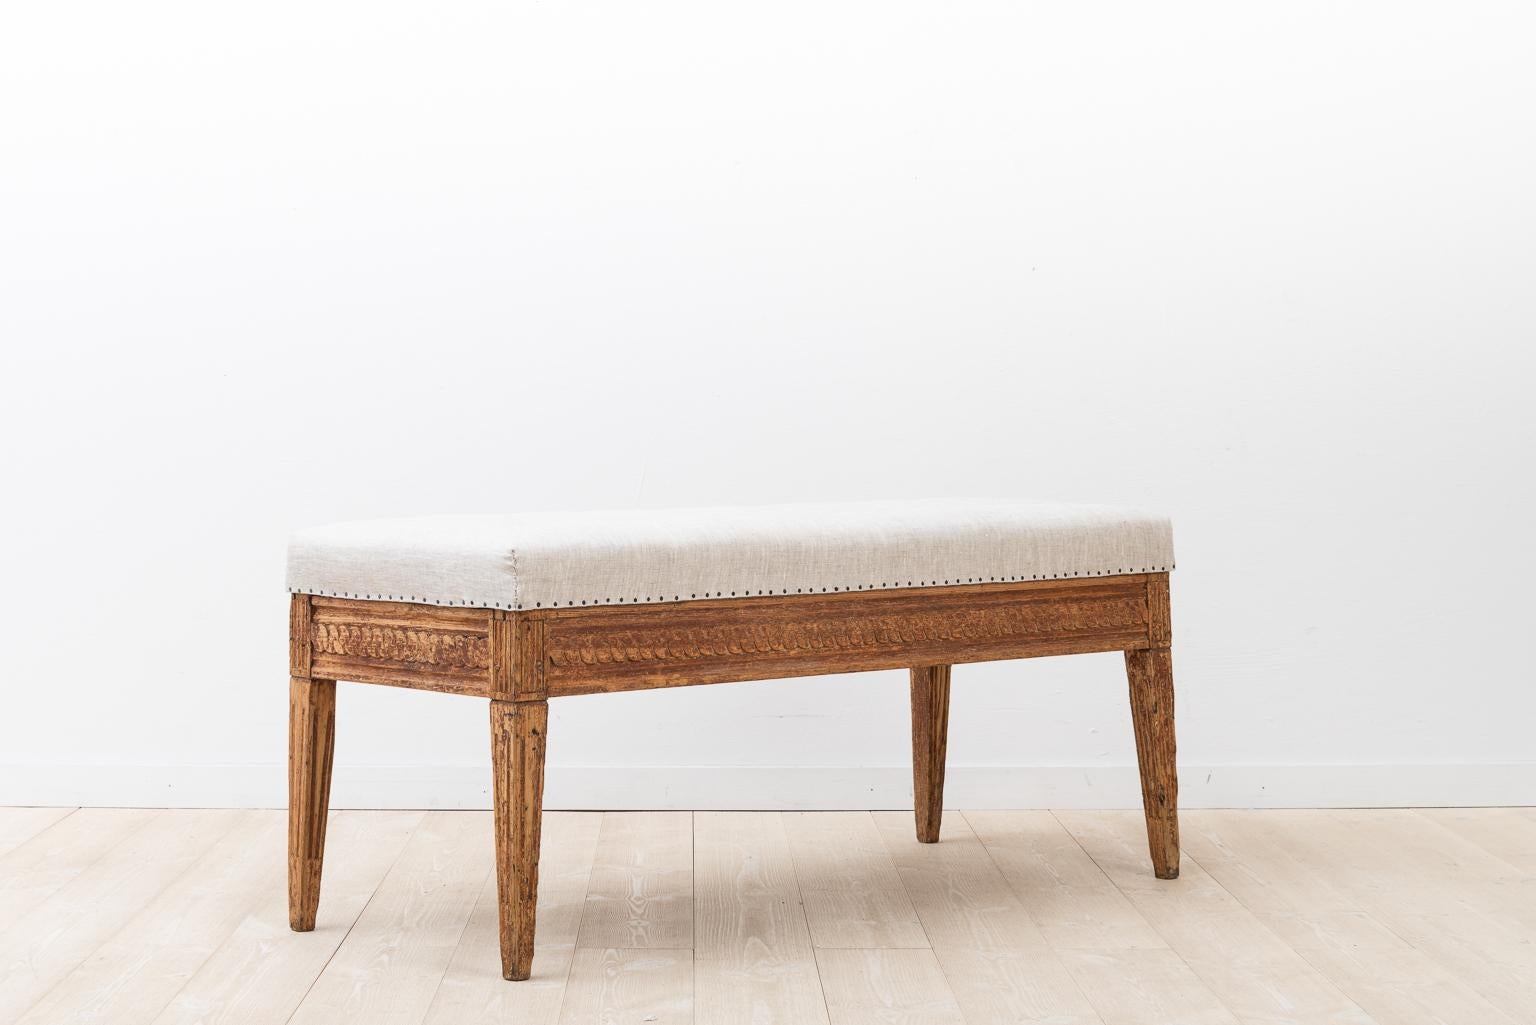 Gustavian bench manufactured in Sweden during the 1790s. Remaining traces of the original paint. Richly decorated with Gustavian styled wooden carvings. The seat has been renovated and dressed with linen fabric.
   